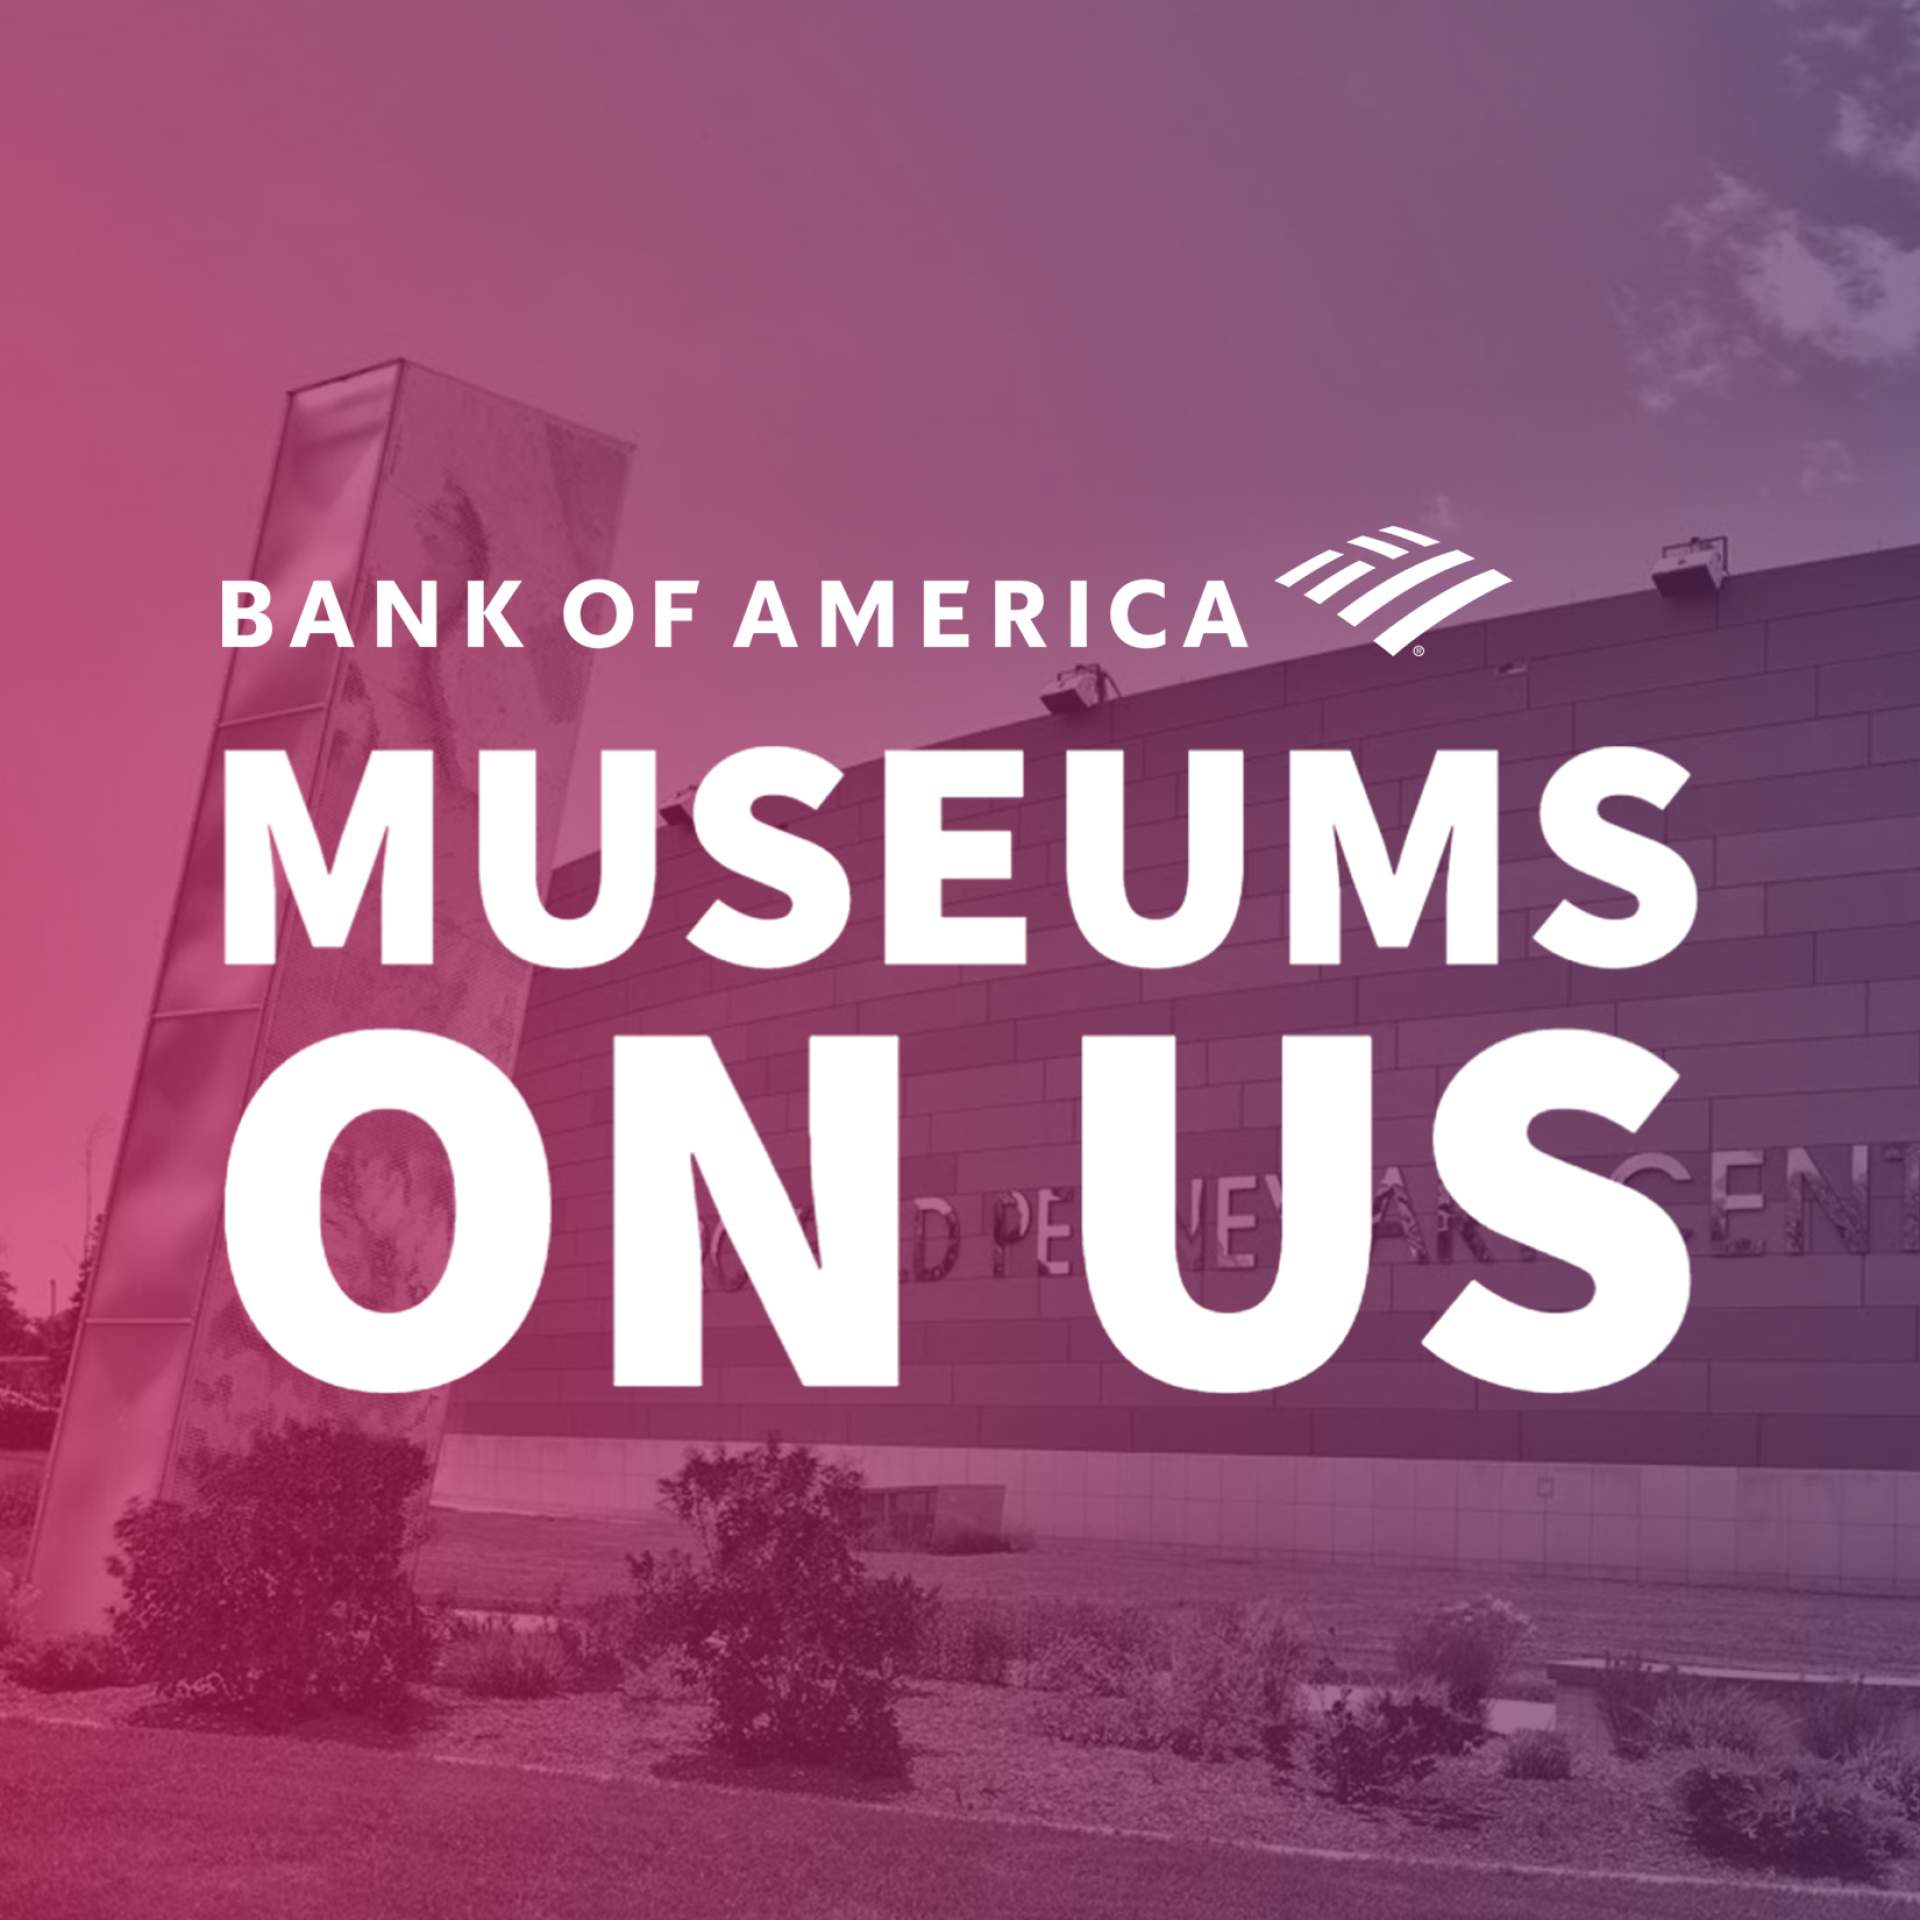 Bank of America's Museums on Us Weekend